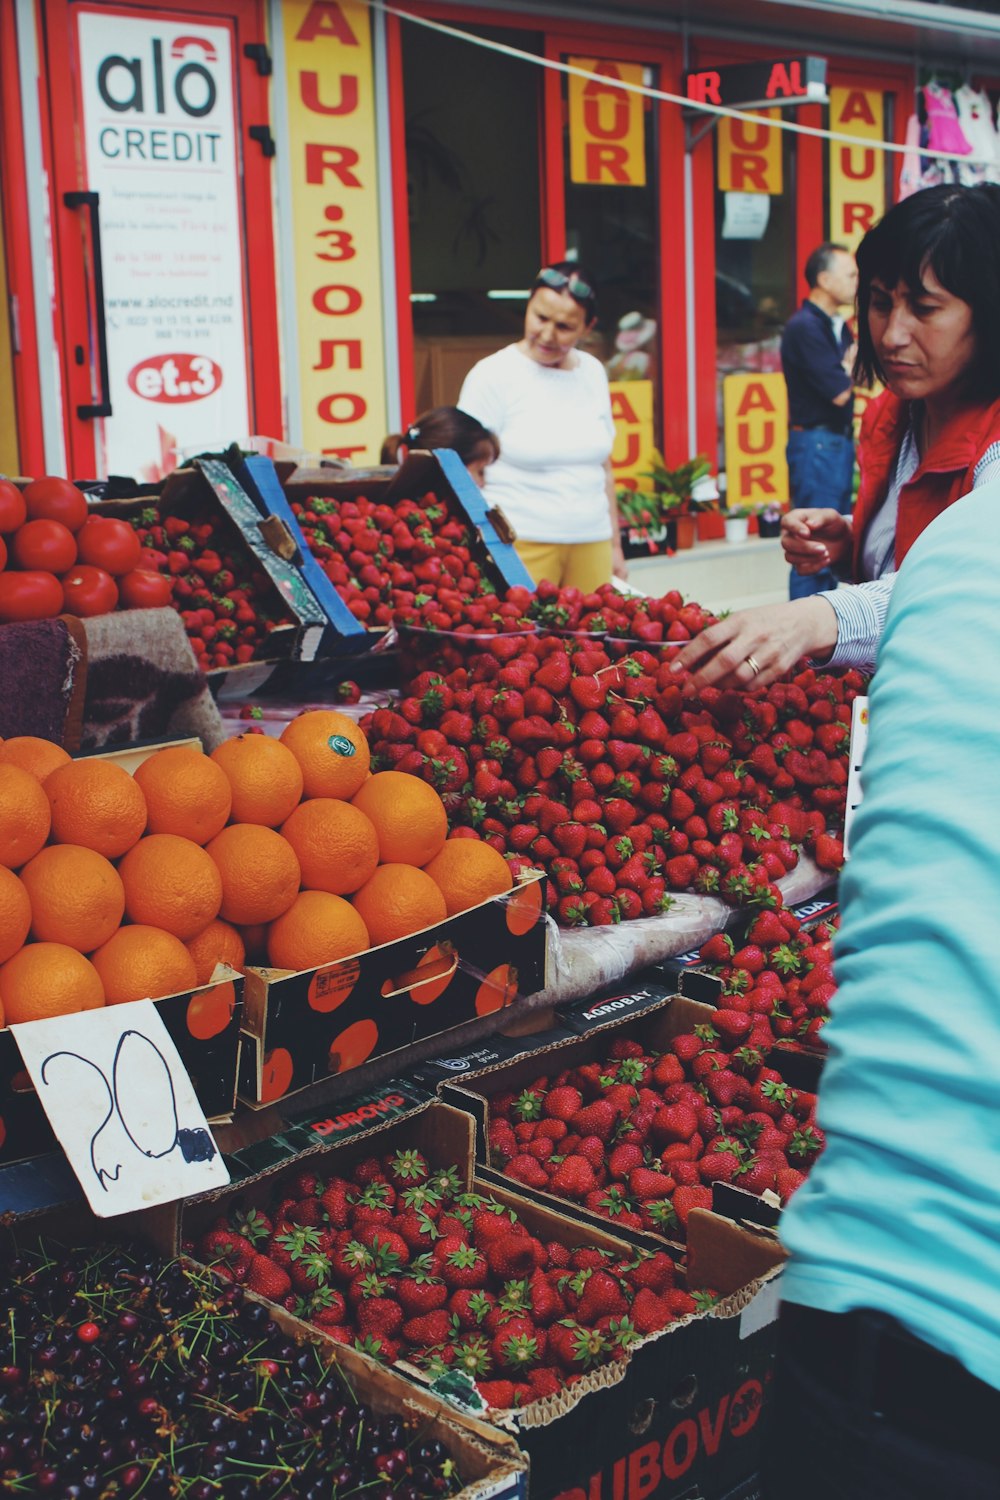 woman buying strawberries at the market